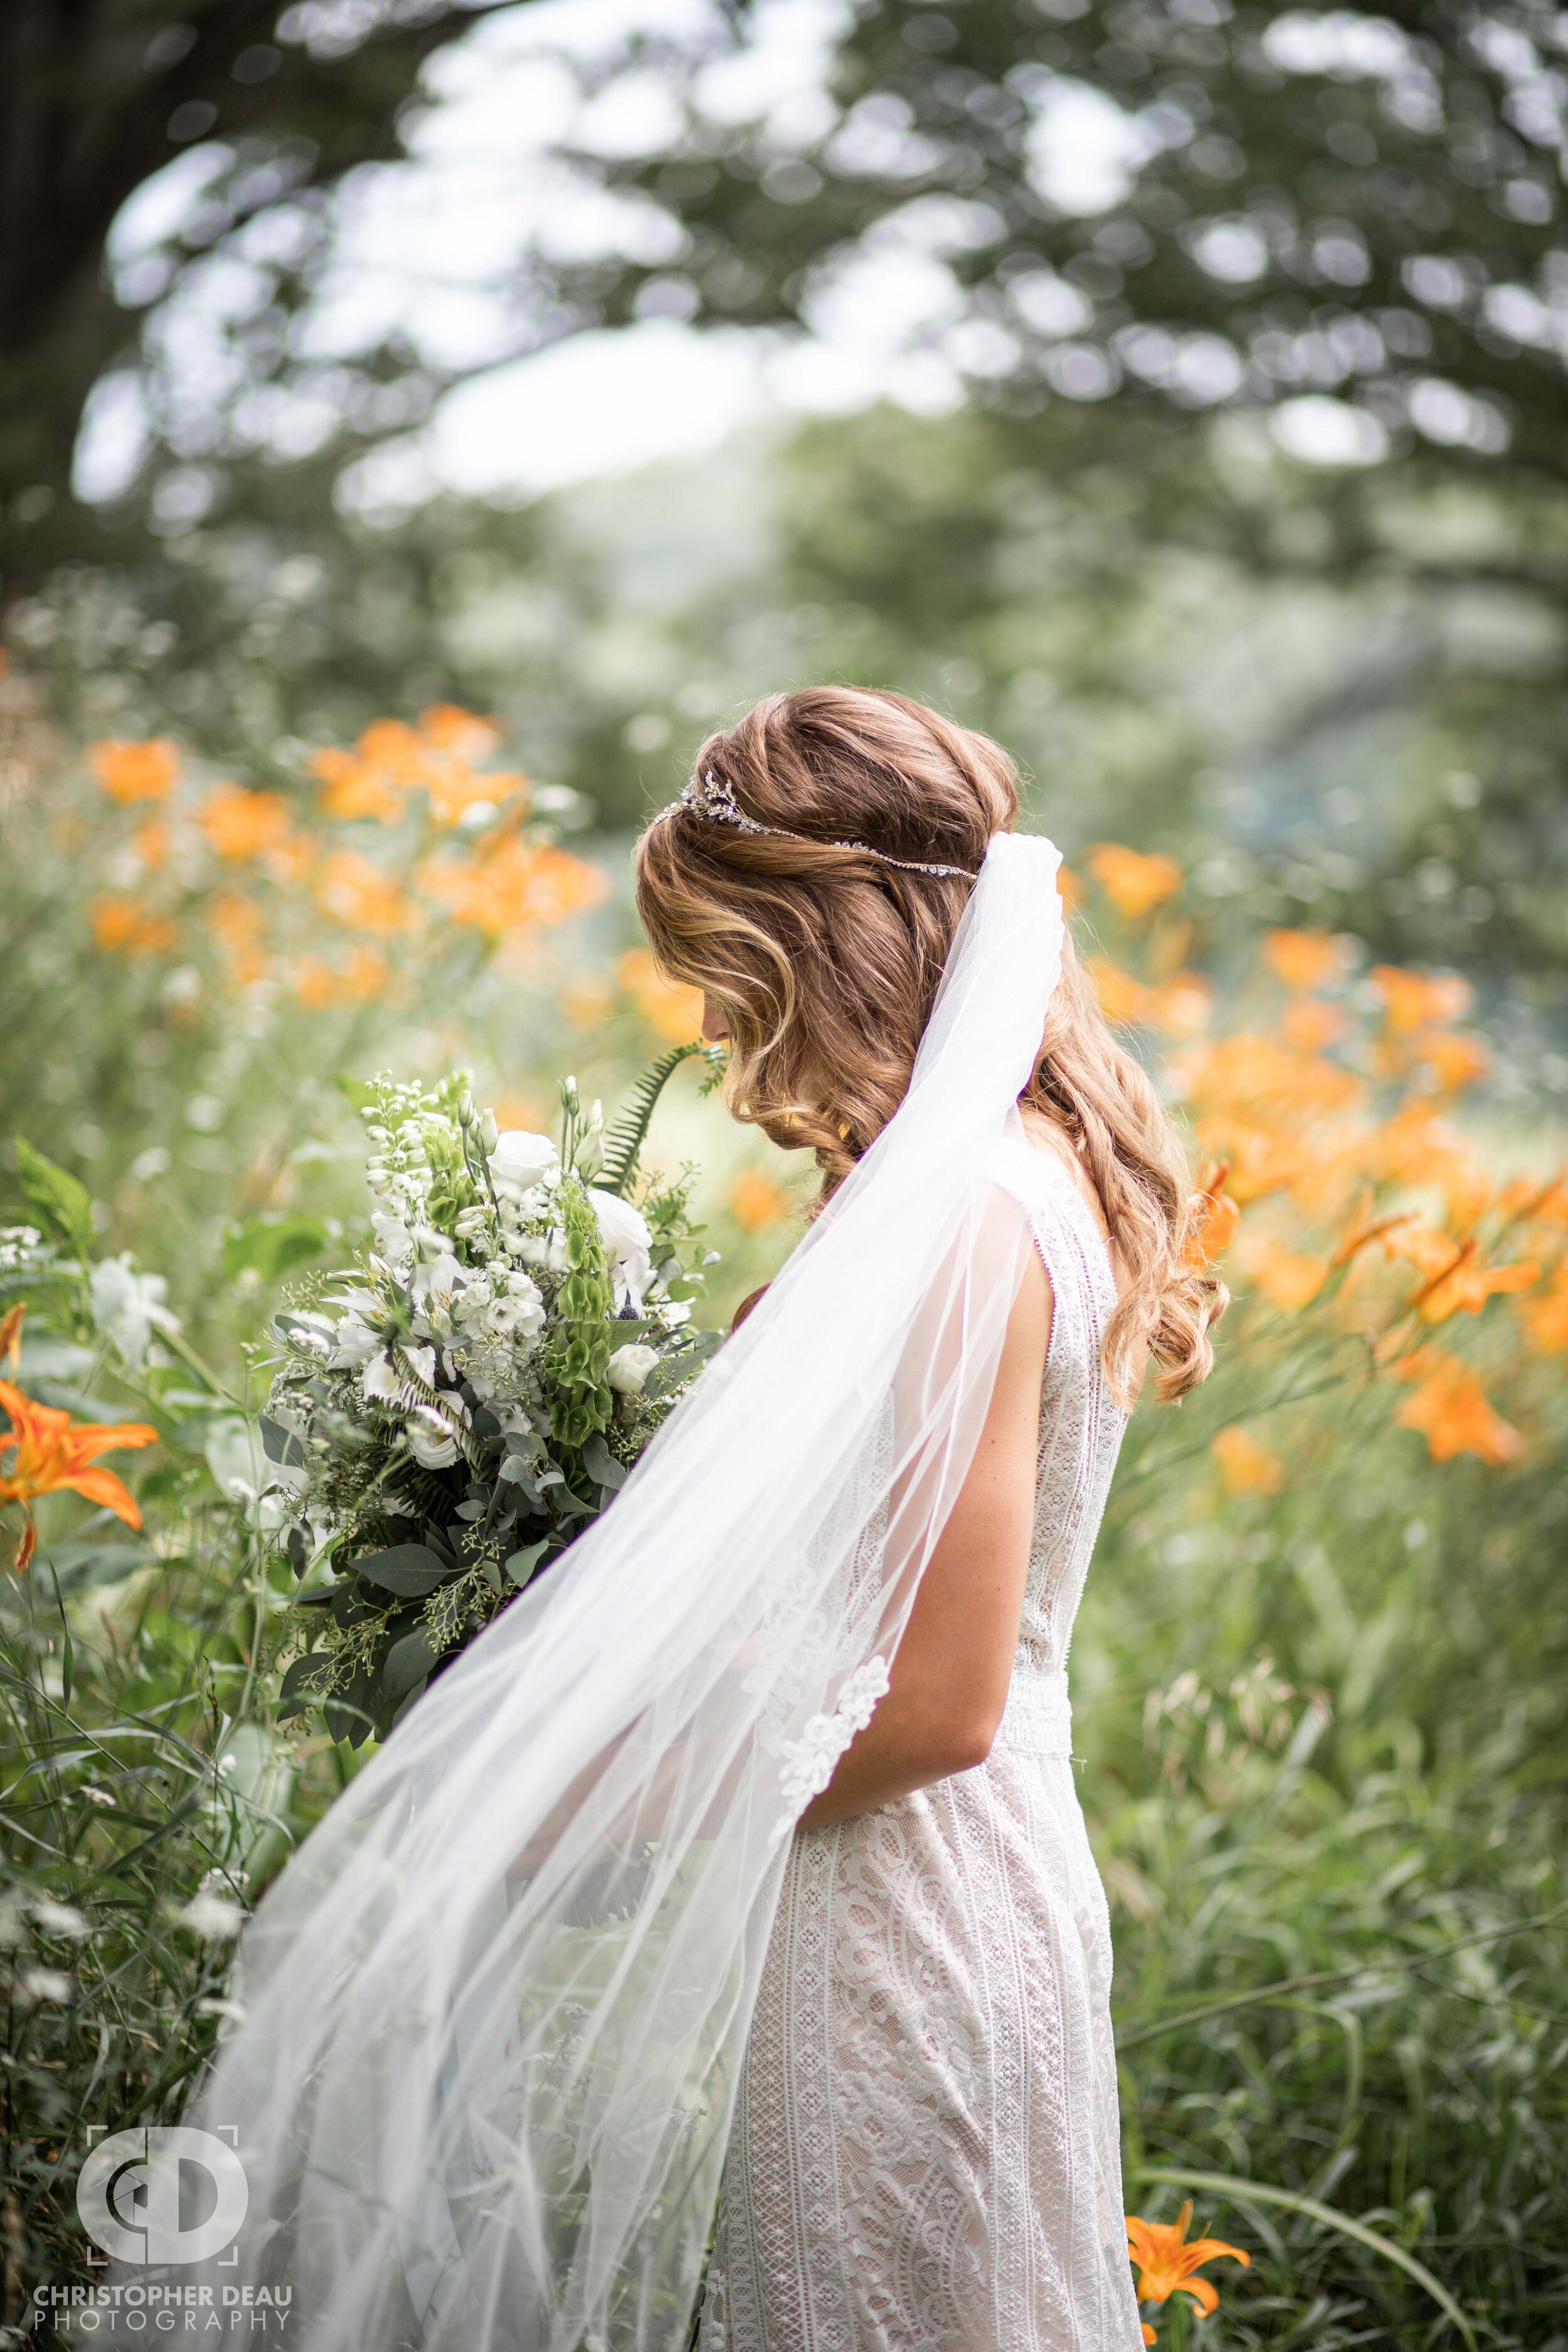  a bride’s veil flows around her as she smells her bouquet while surrounded by flowers 